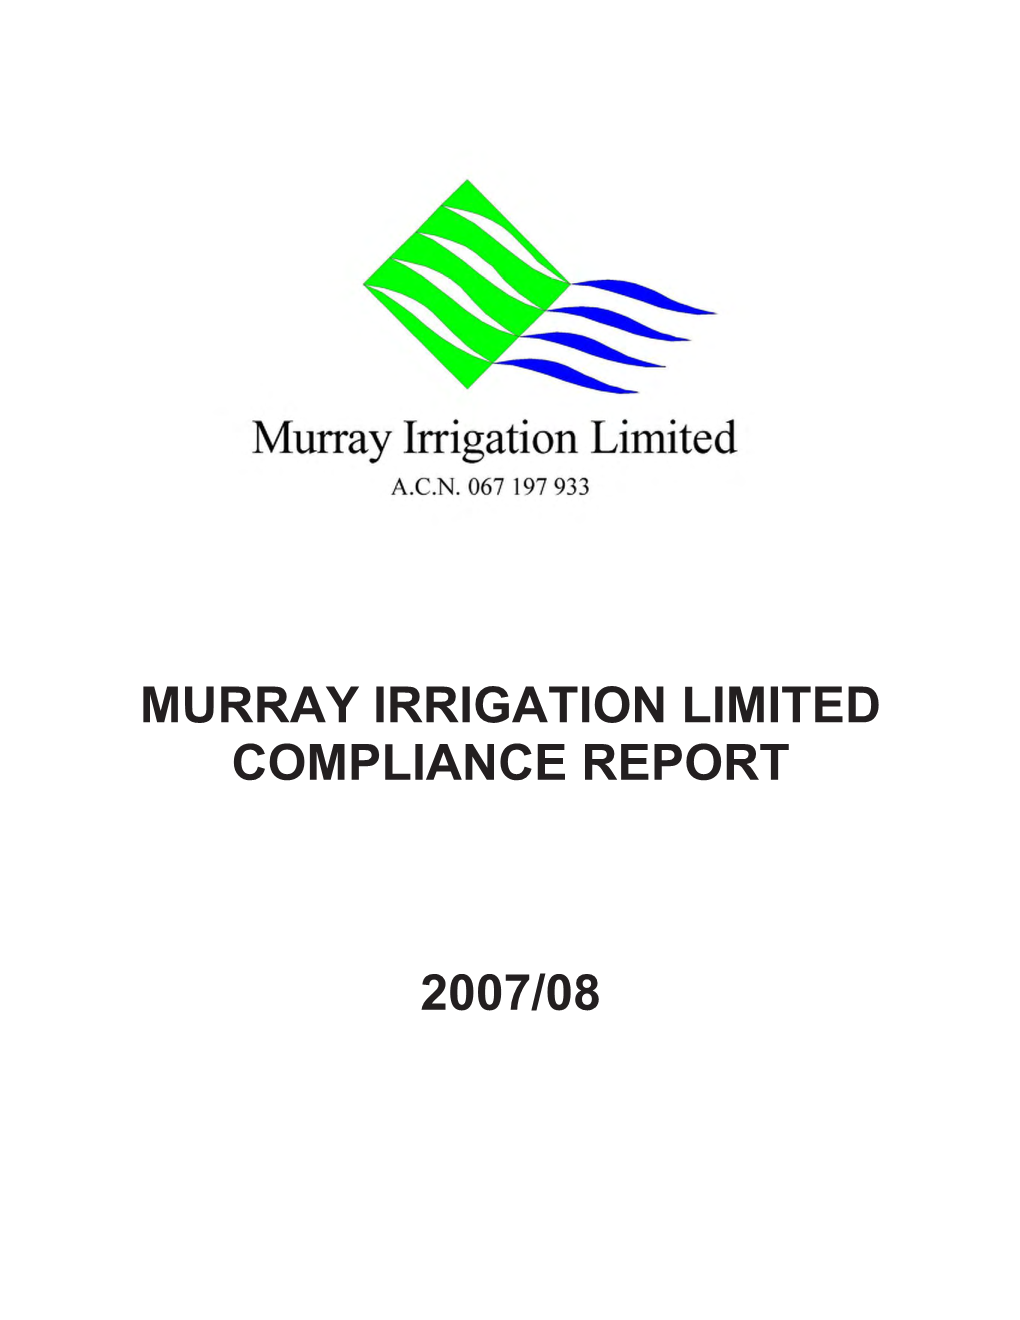 Murray Irrigation Limited Compliance Report 2007/08